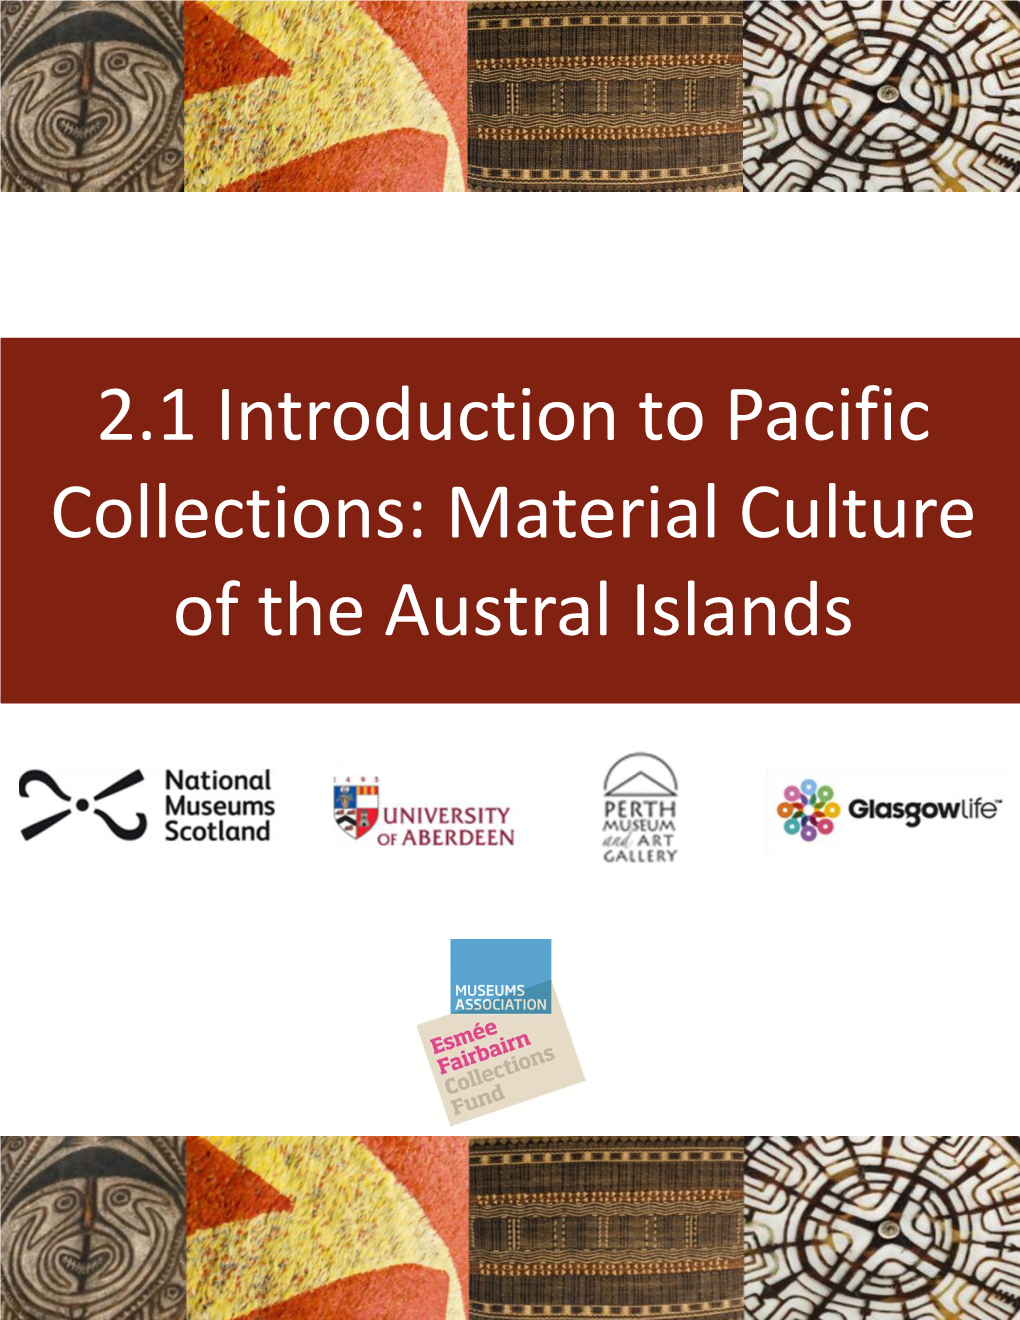 2.1 Material Culture of the Austral Islands